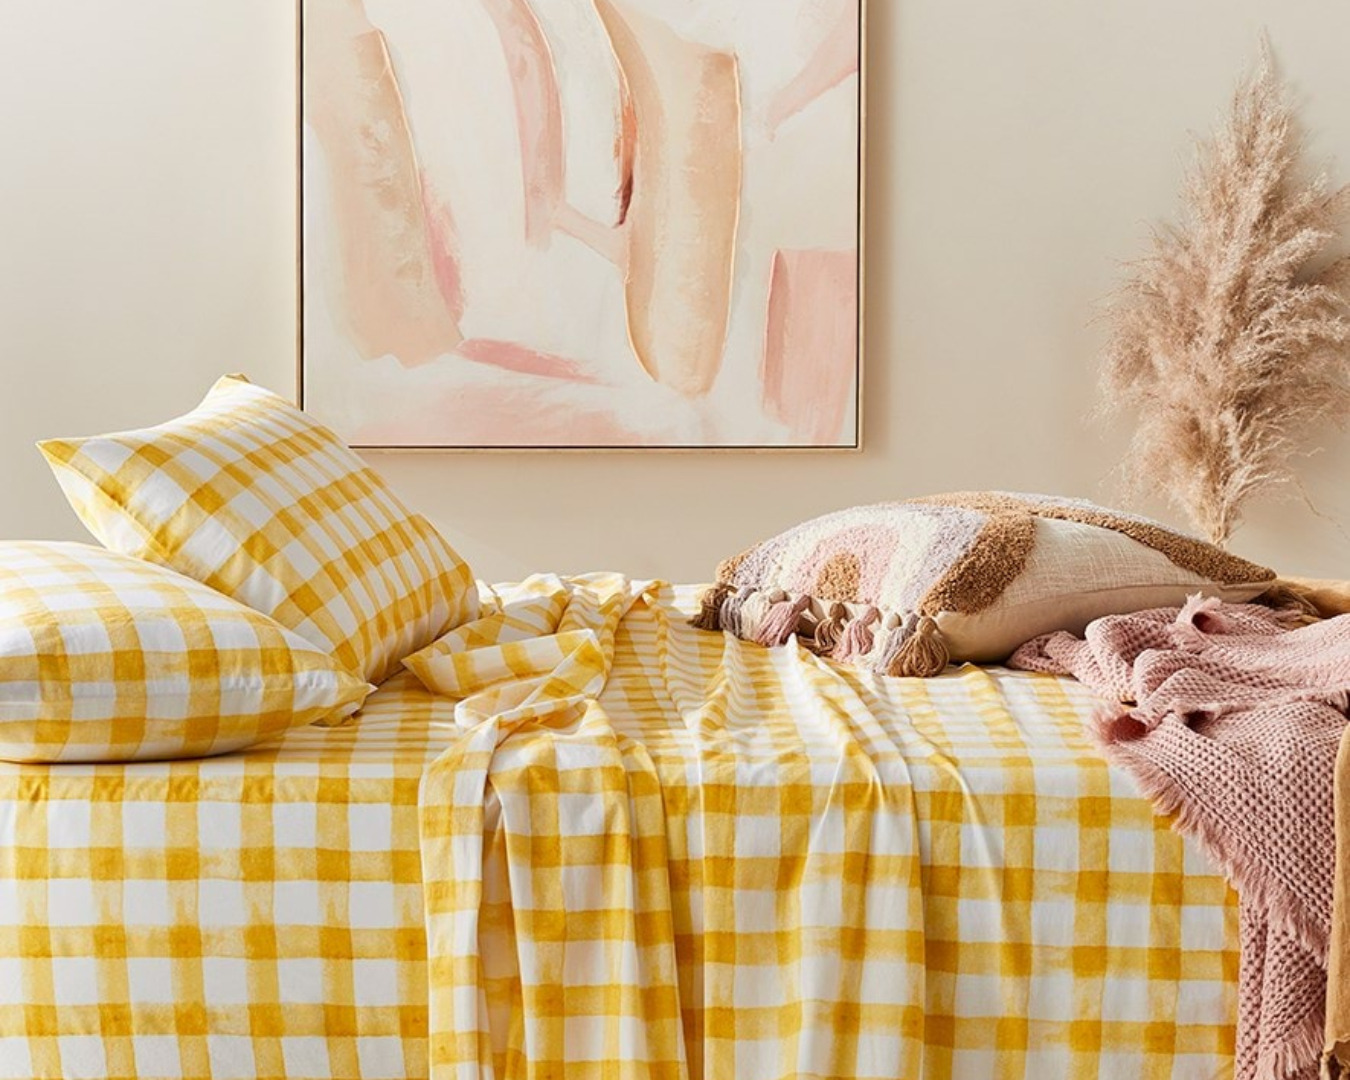 The flannelette sheet set from Adairs looks adorable in sunshine-yellow check